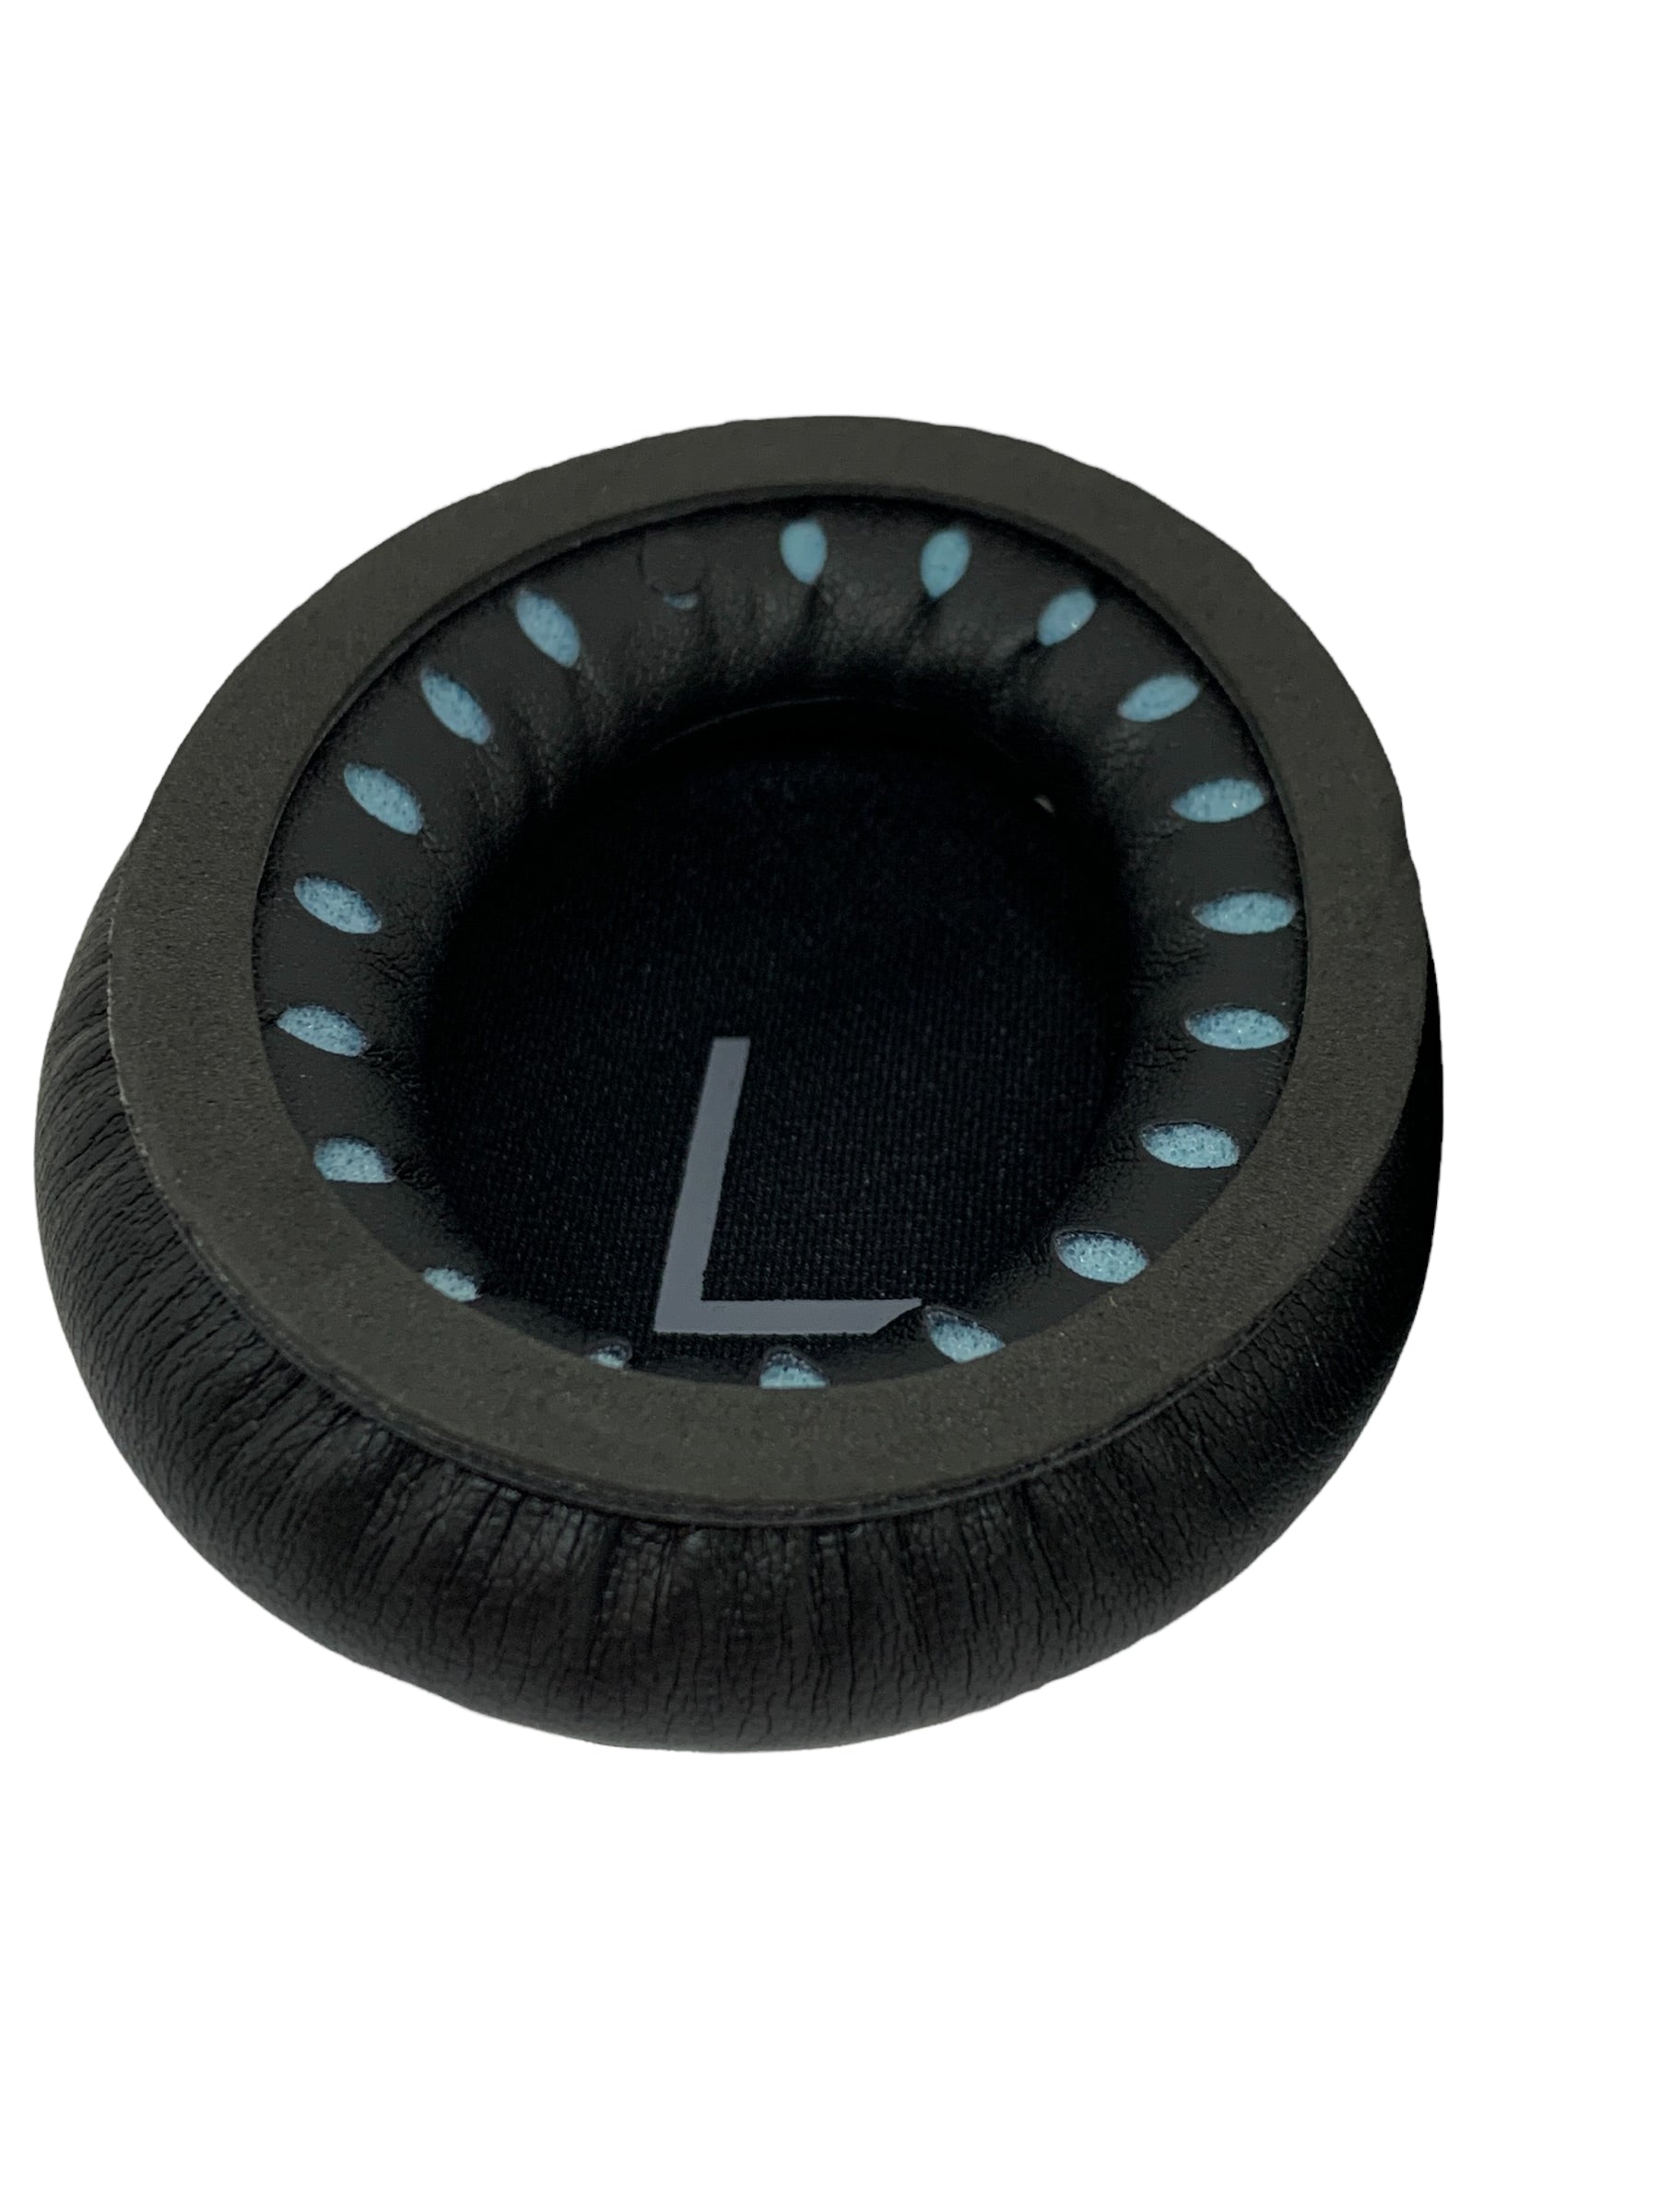 CentralSound Memory Foam Ear Pad Cushions for Bose QuietComfort 45 QC45 Headphones - CentralSound